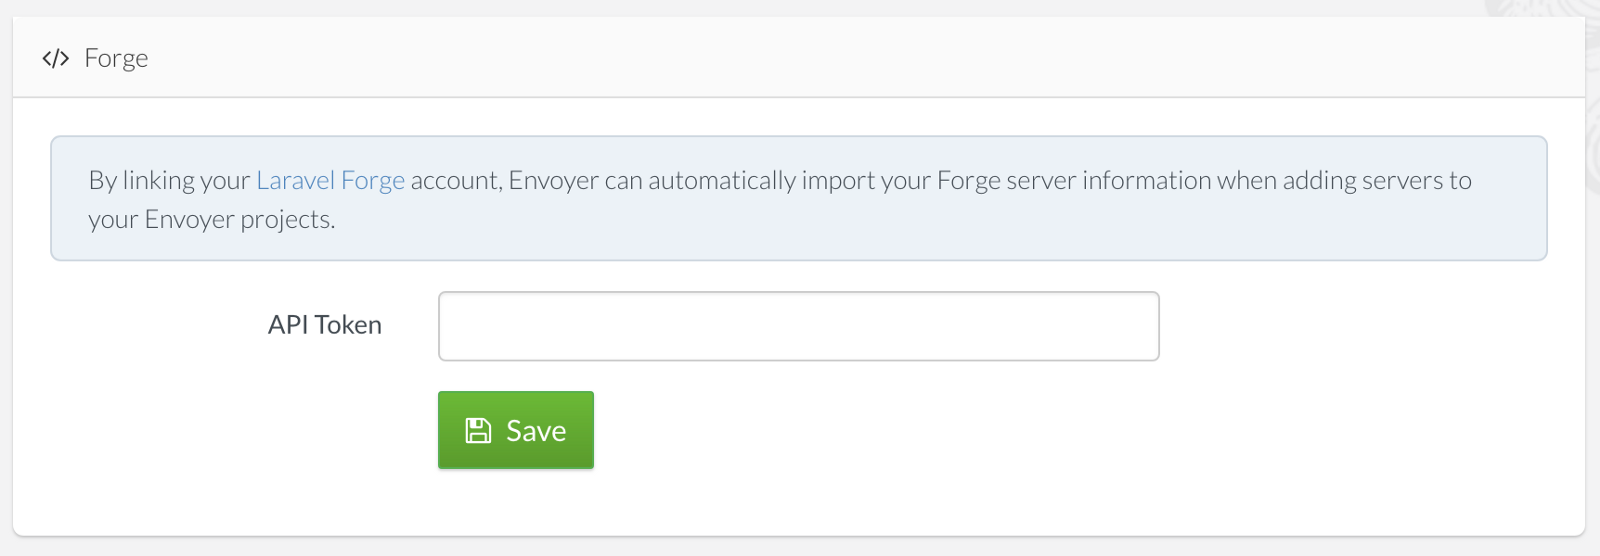 Link your Forge API token to Envoyer